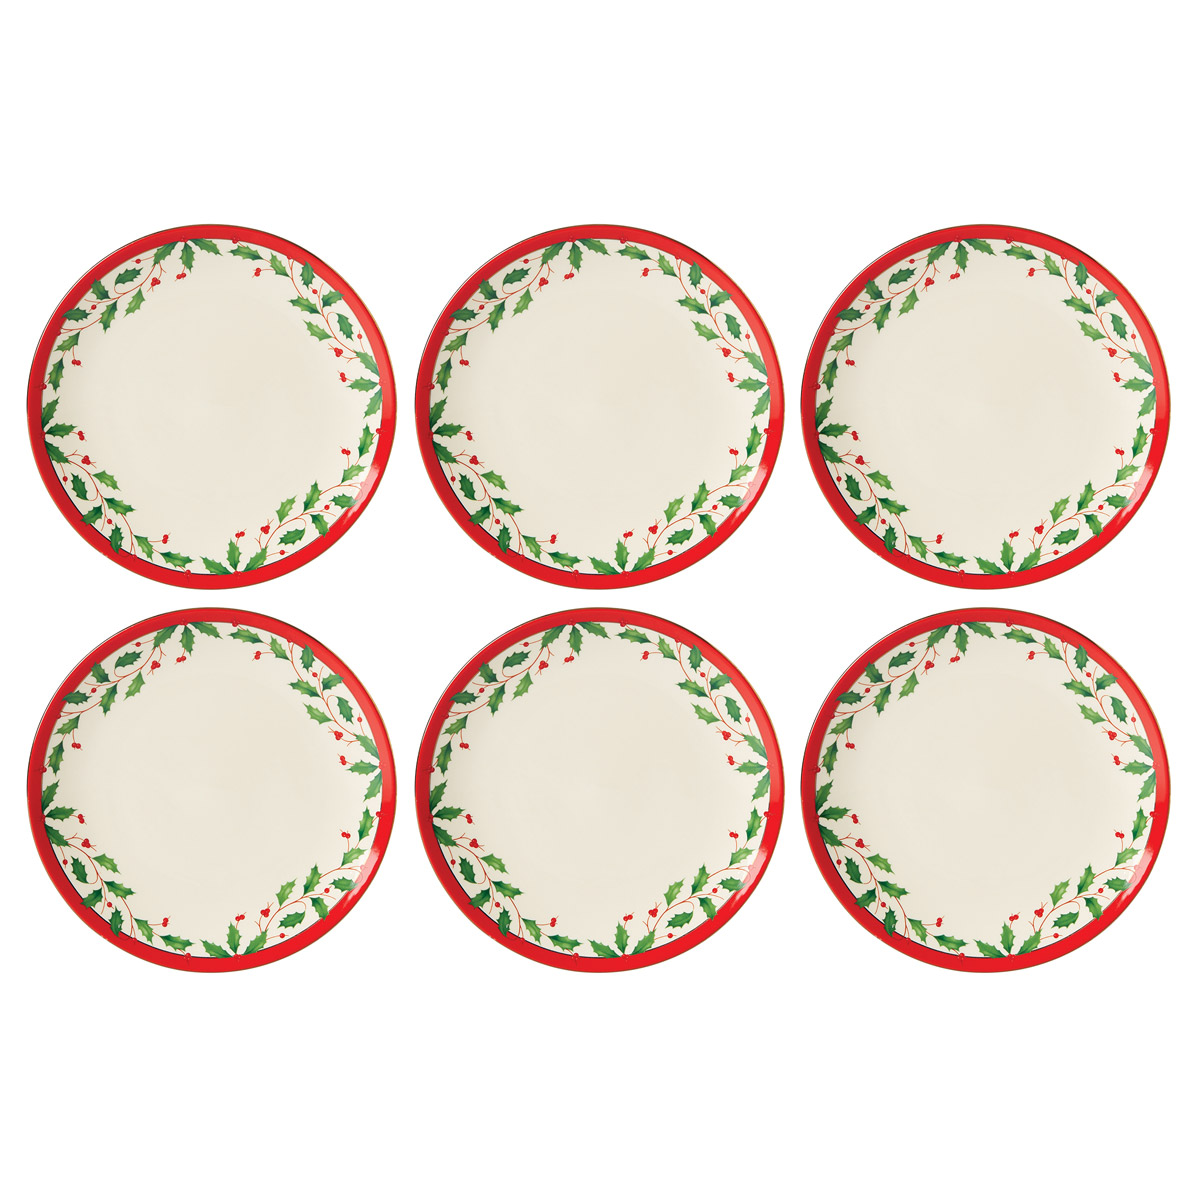 Lenox China Holiday Accent Plate Set of 6, Red and Gold Border